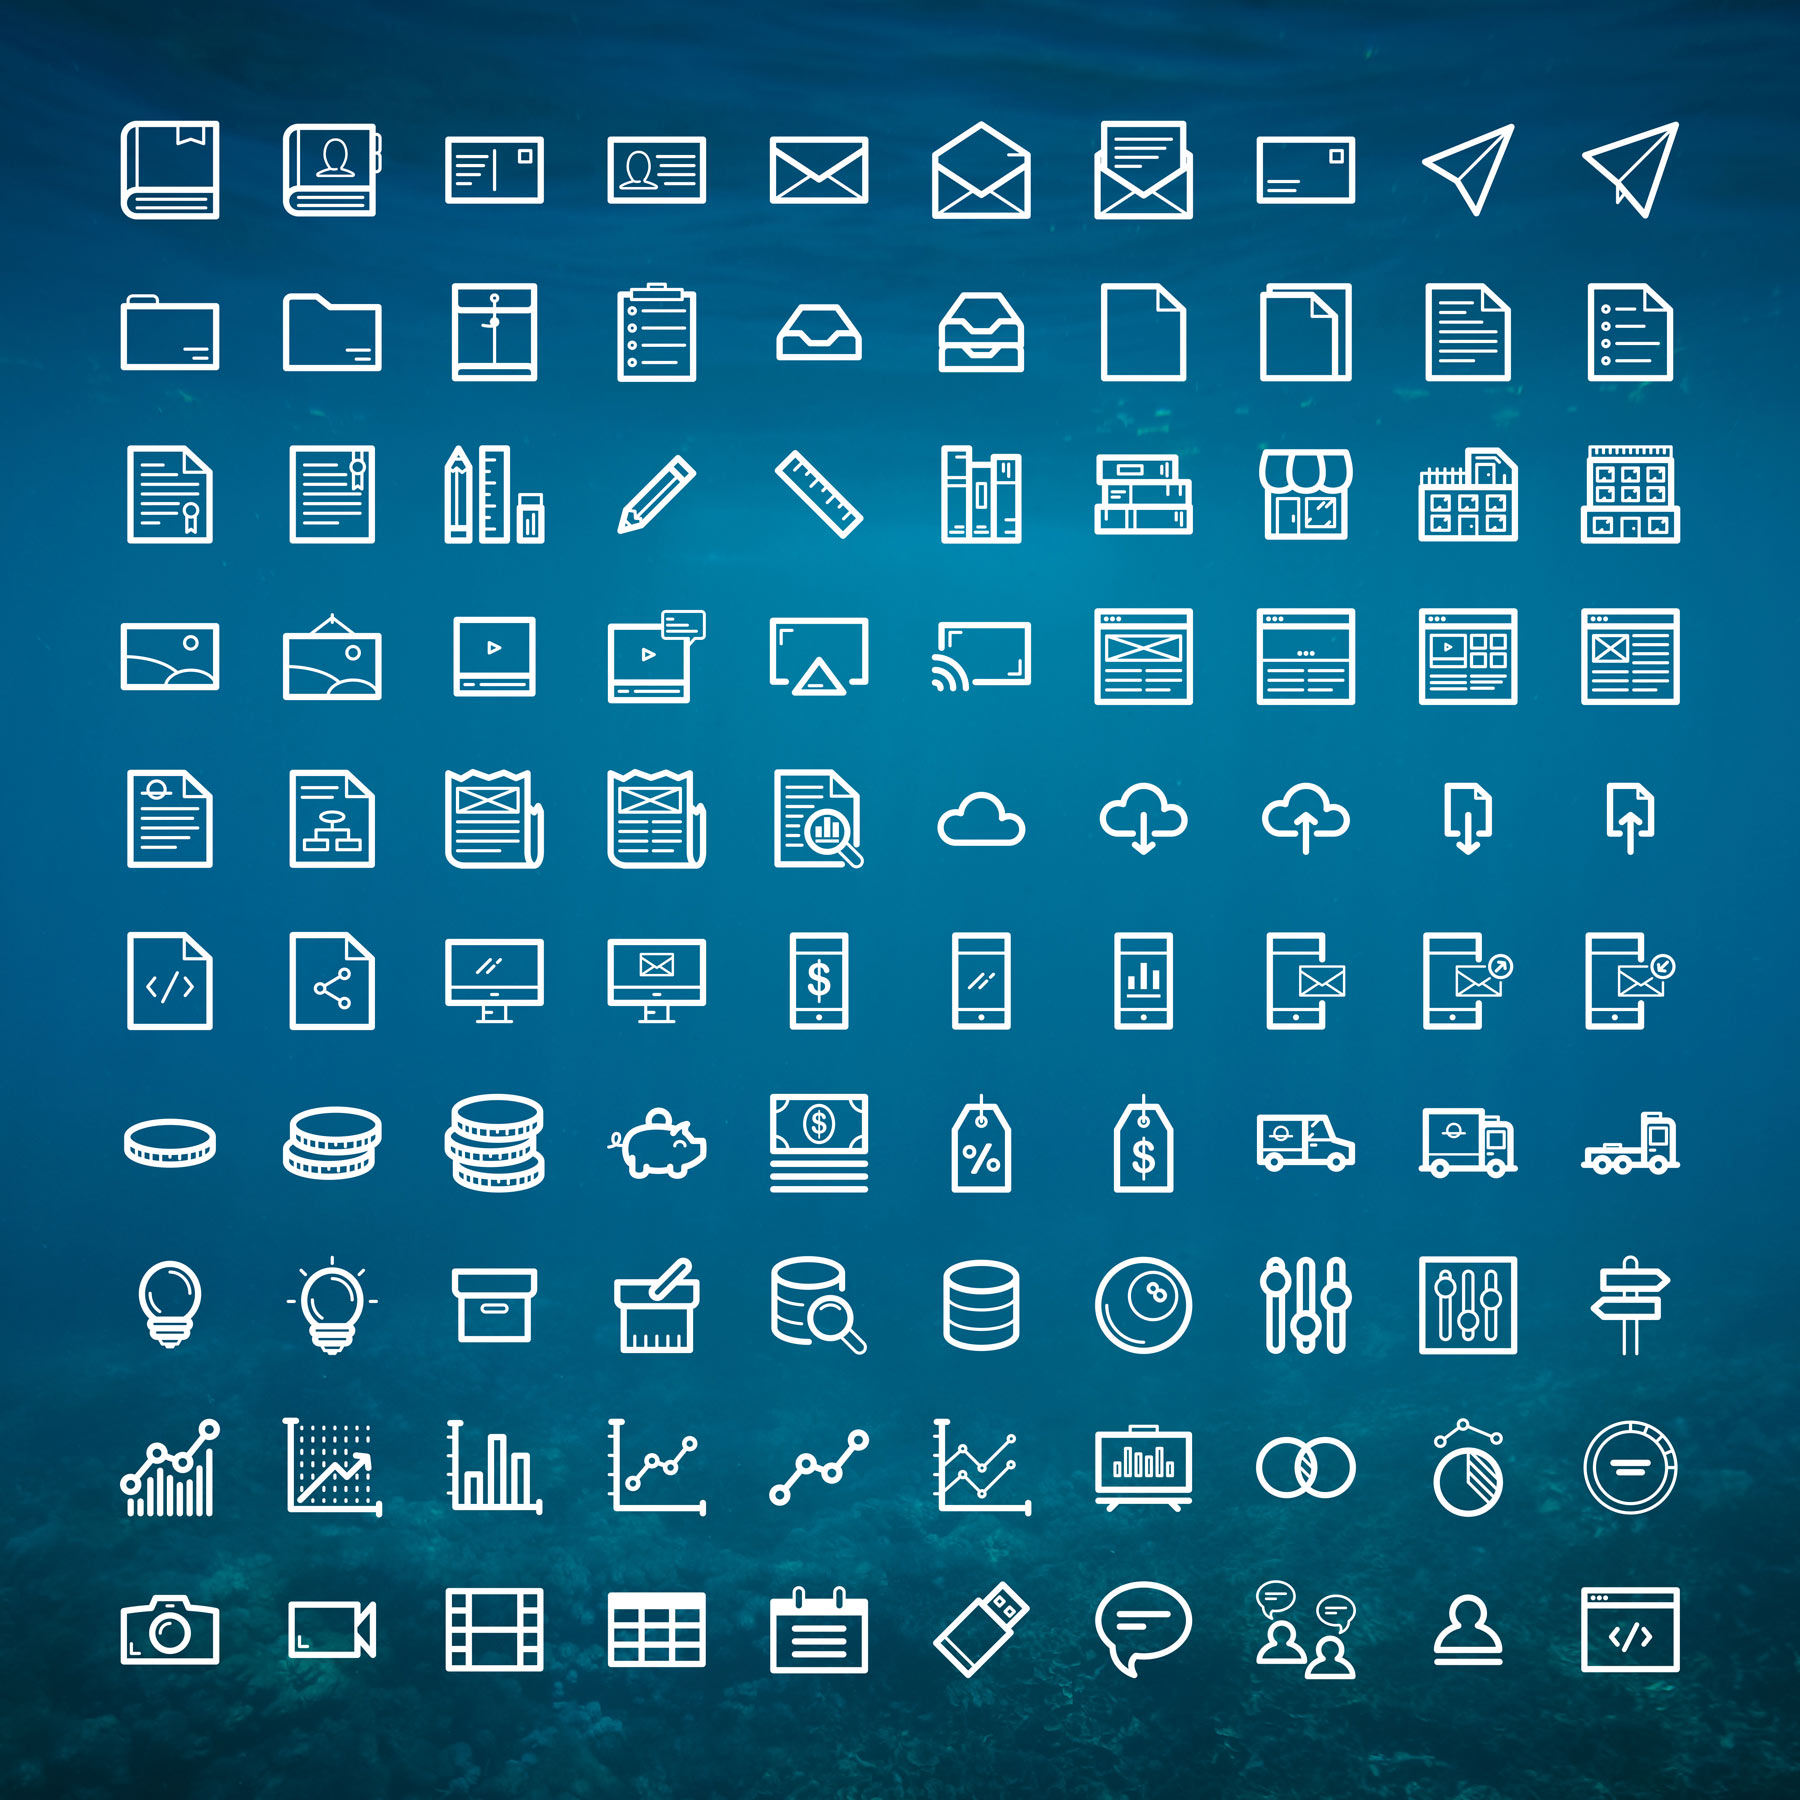 Icon Designs used on tylerbrooksdesigns webpage